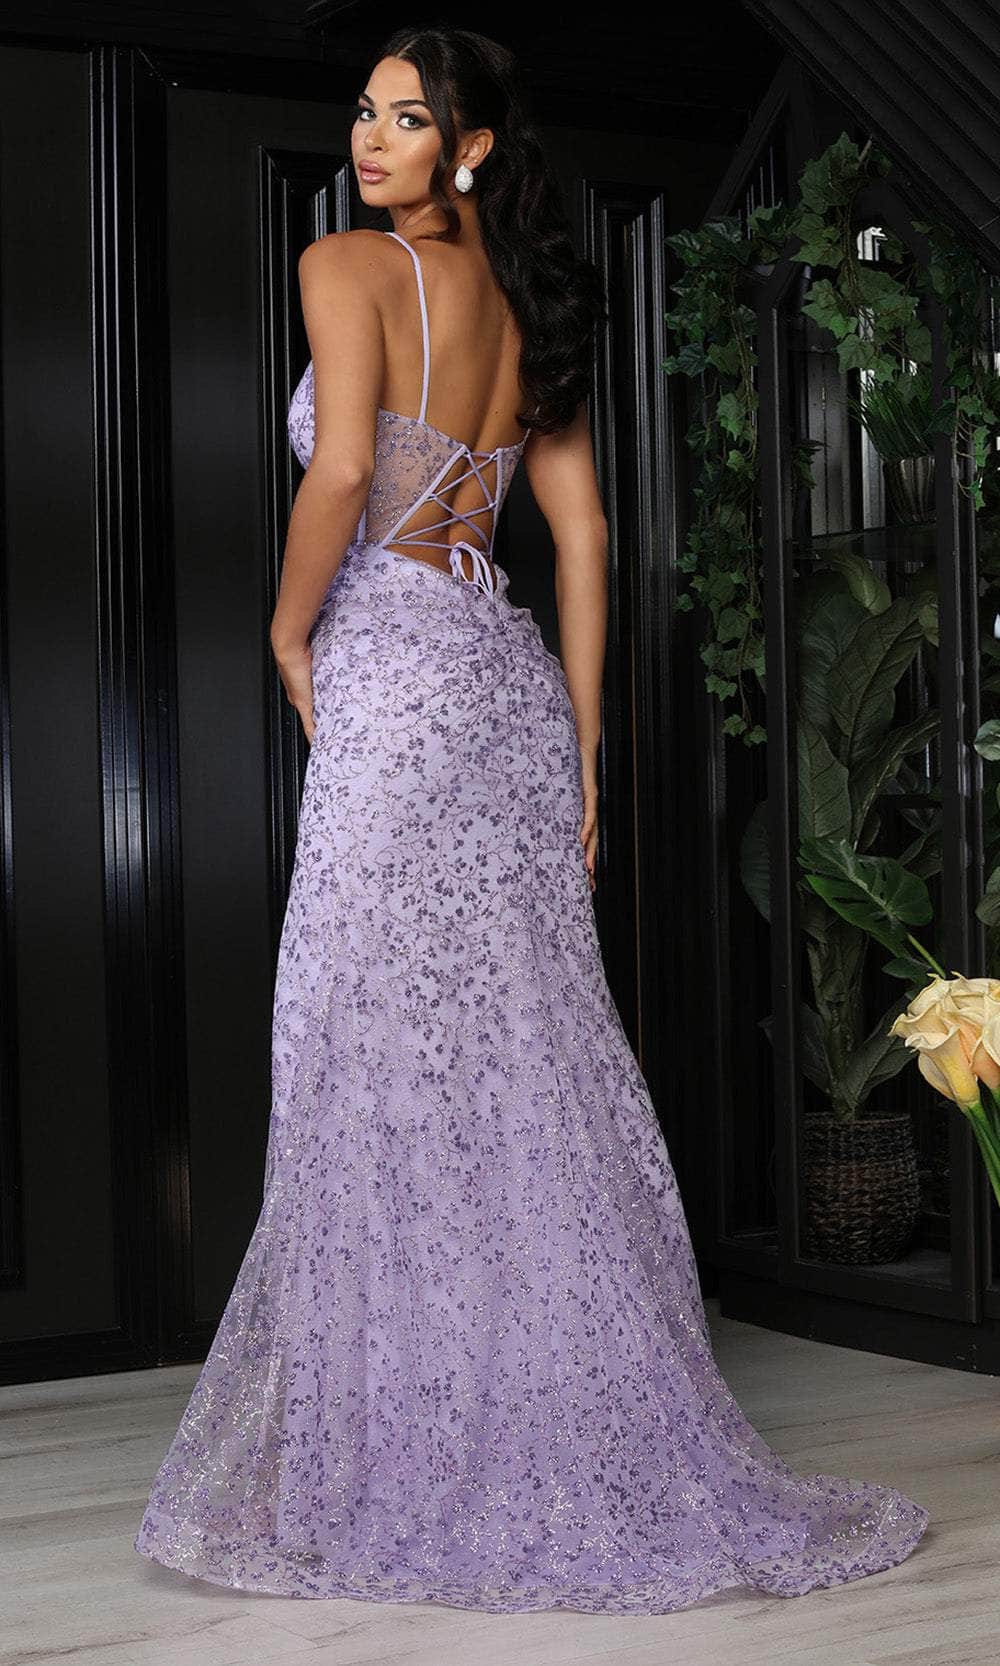 May Queen MQ2054 - Glitter Ornate Evening Dress with Slit Evening Dresses